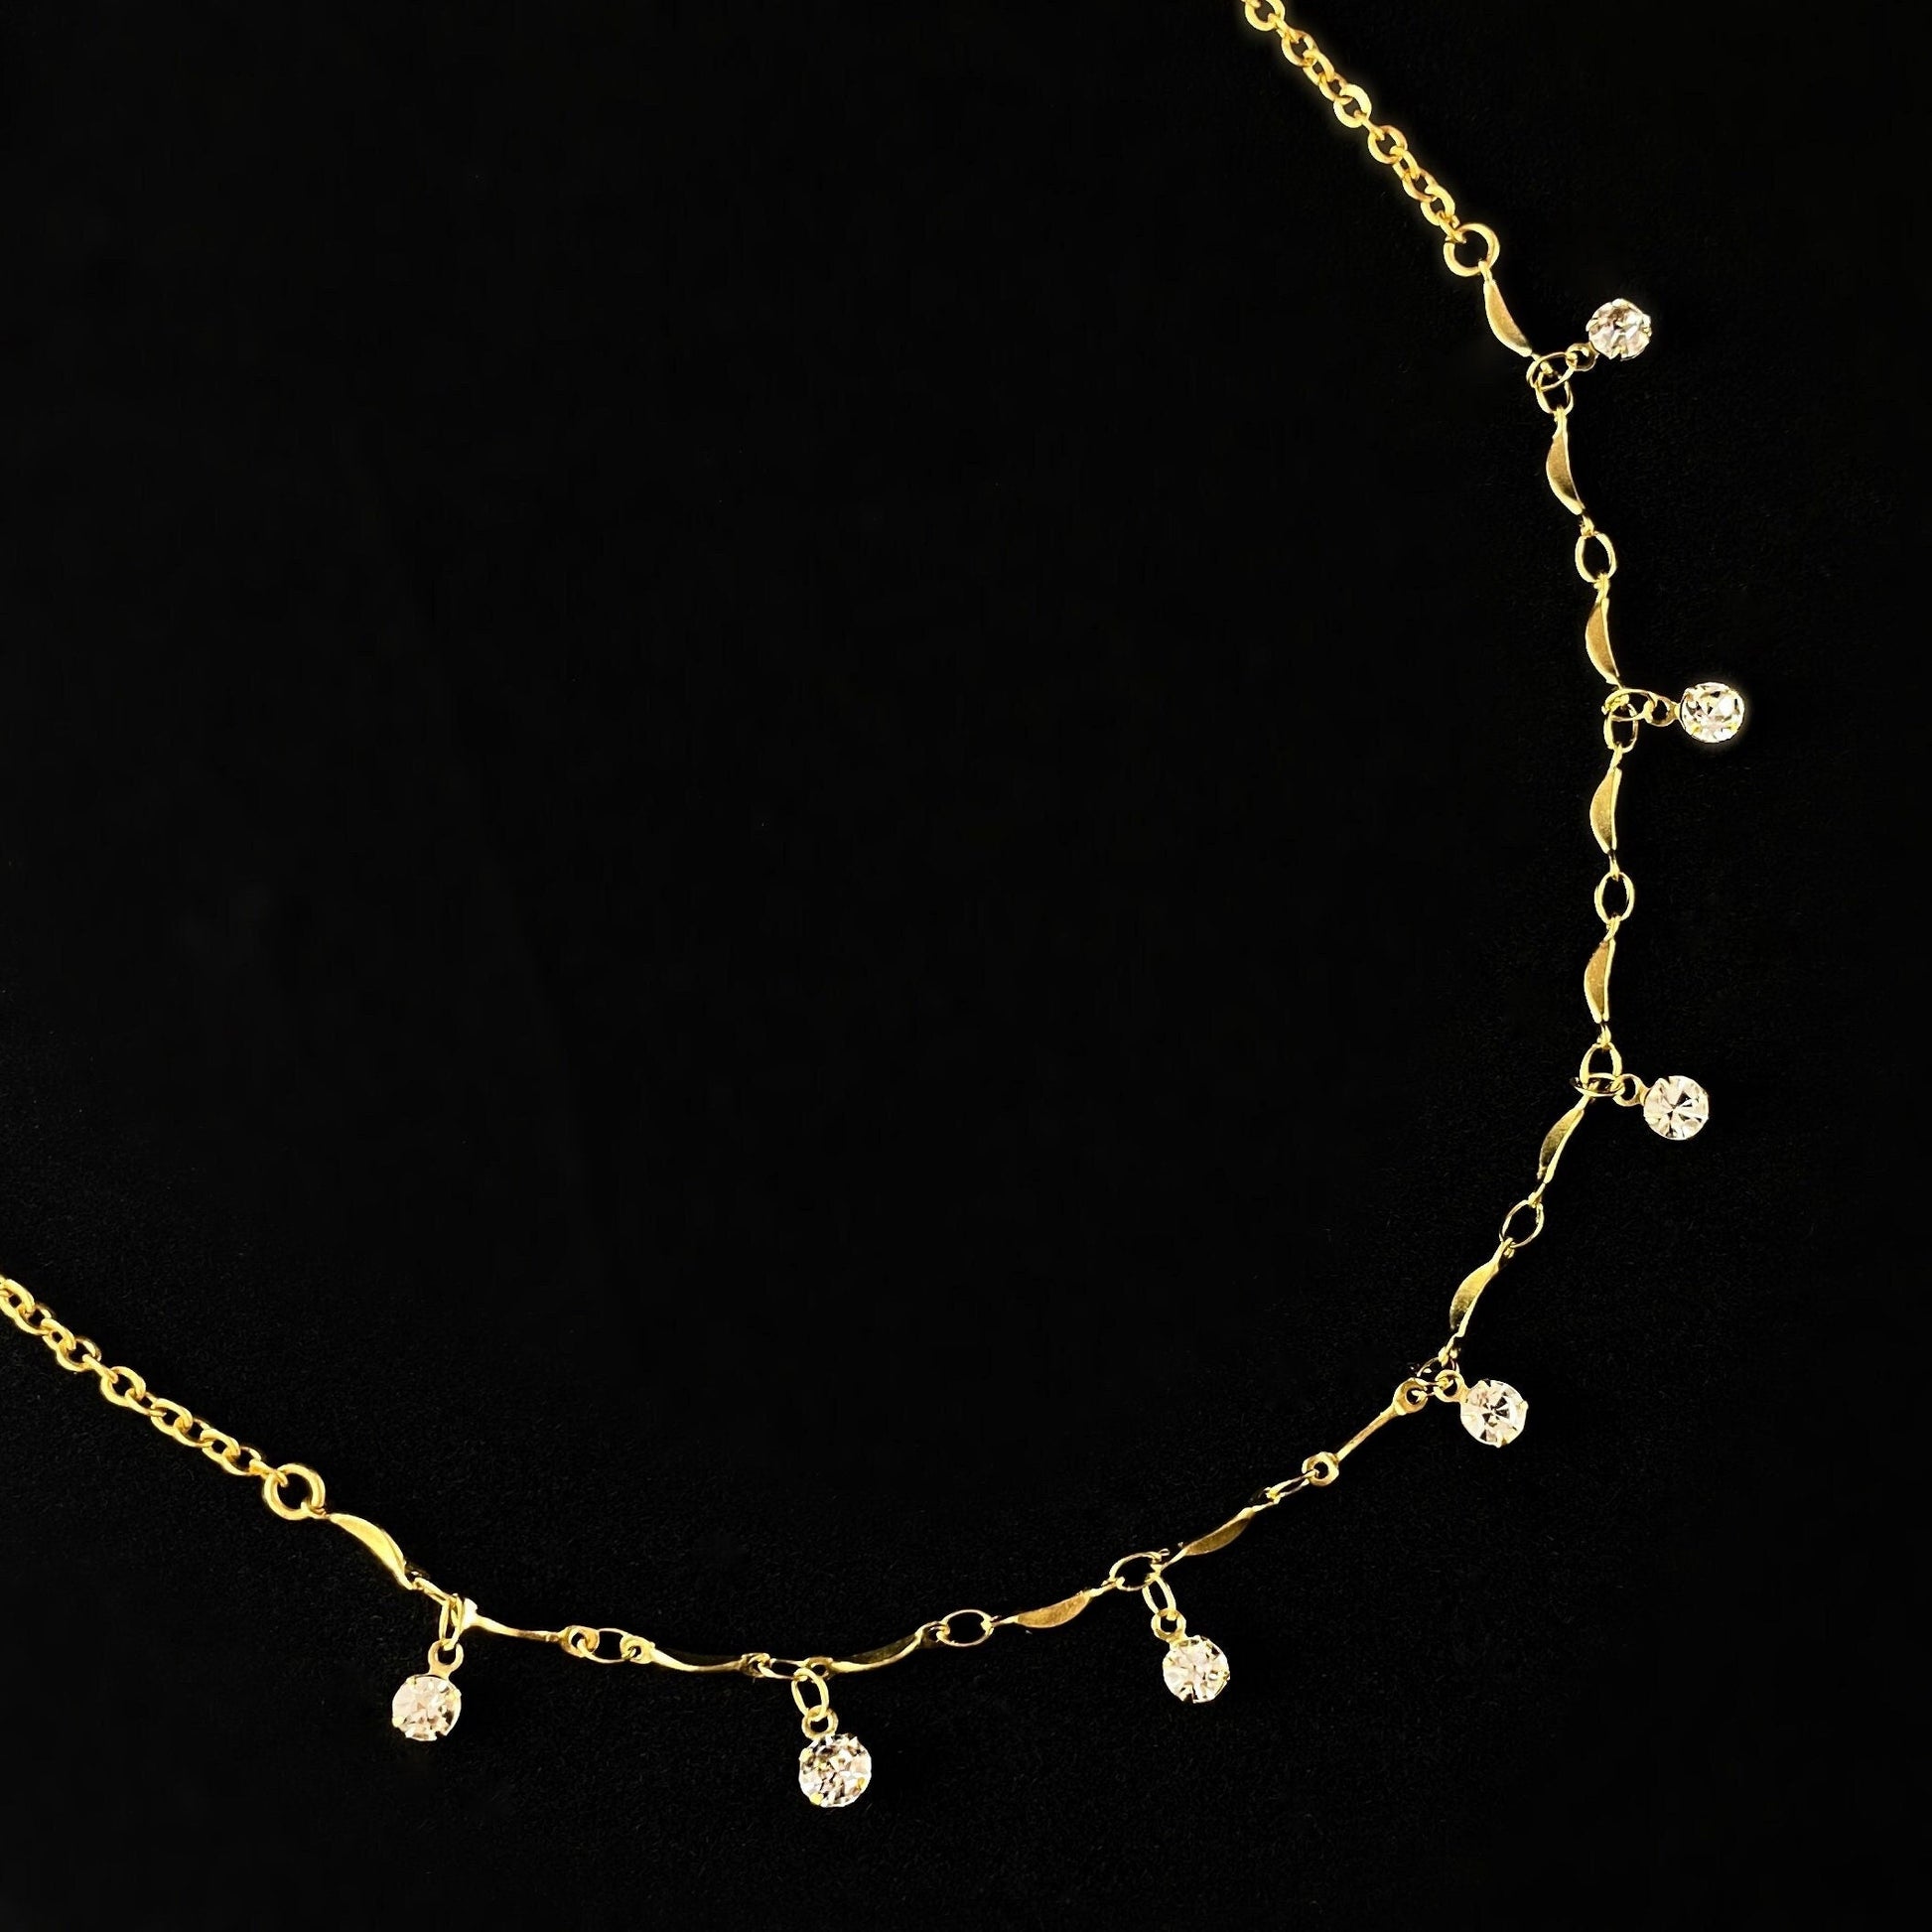 Delicate Gold Chain Necklace with Small Swarovski Crystal Detailing - La Vie Parisienne by Catherine Popesco